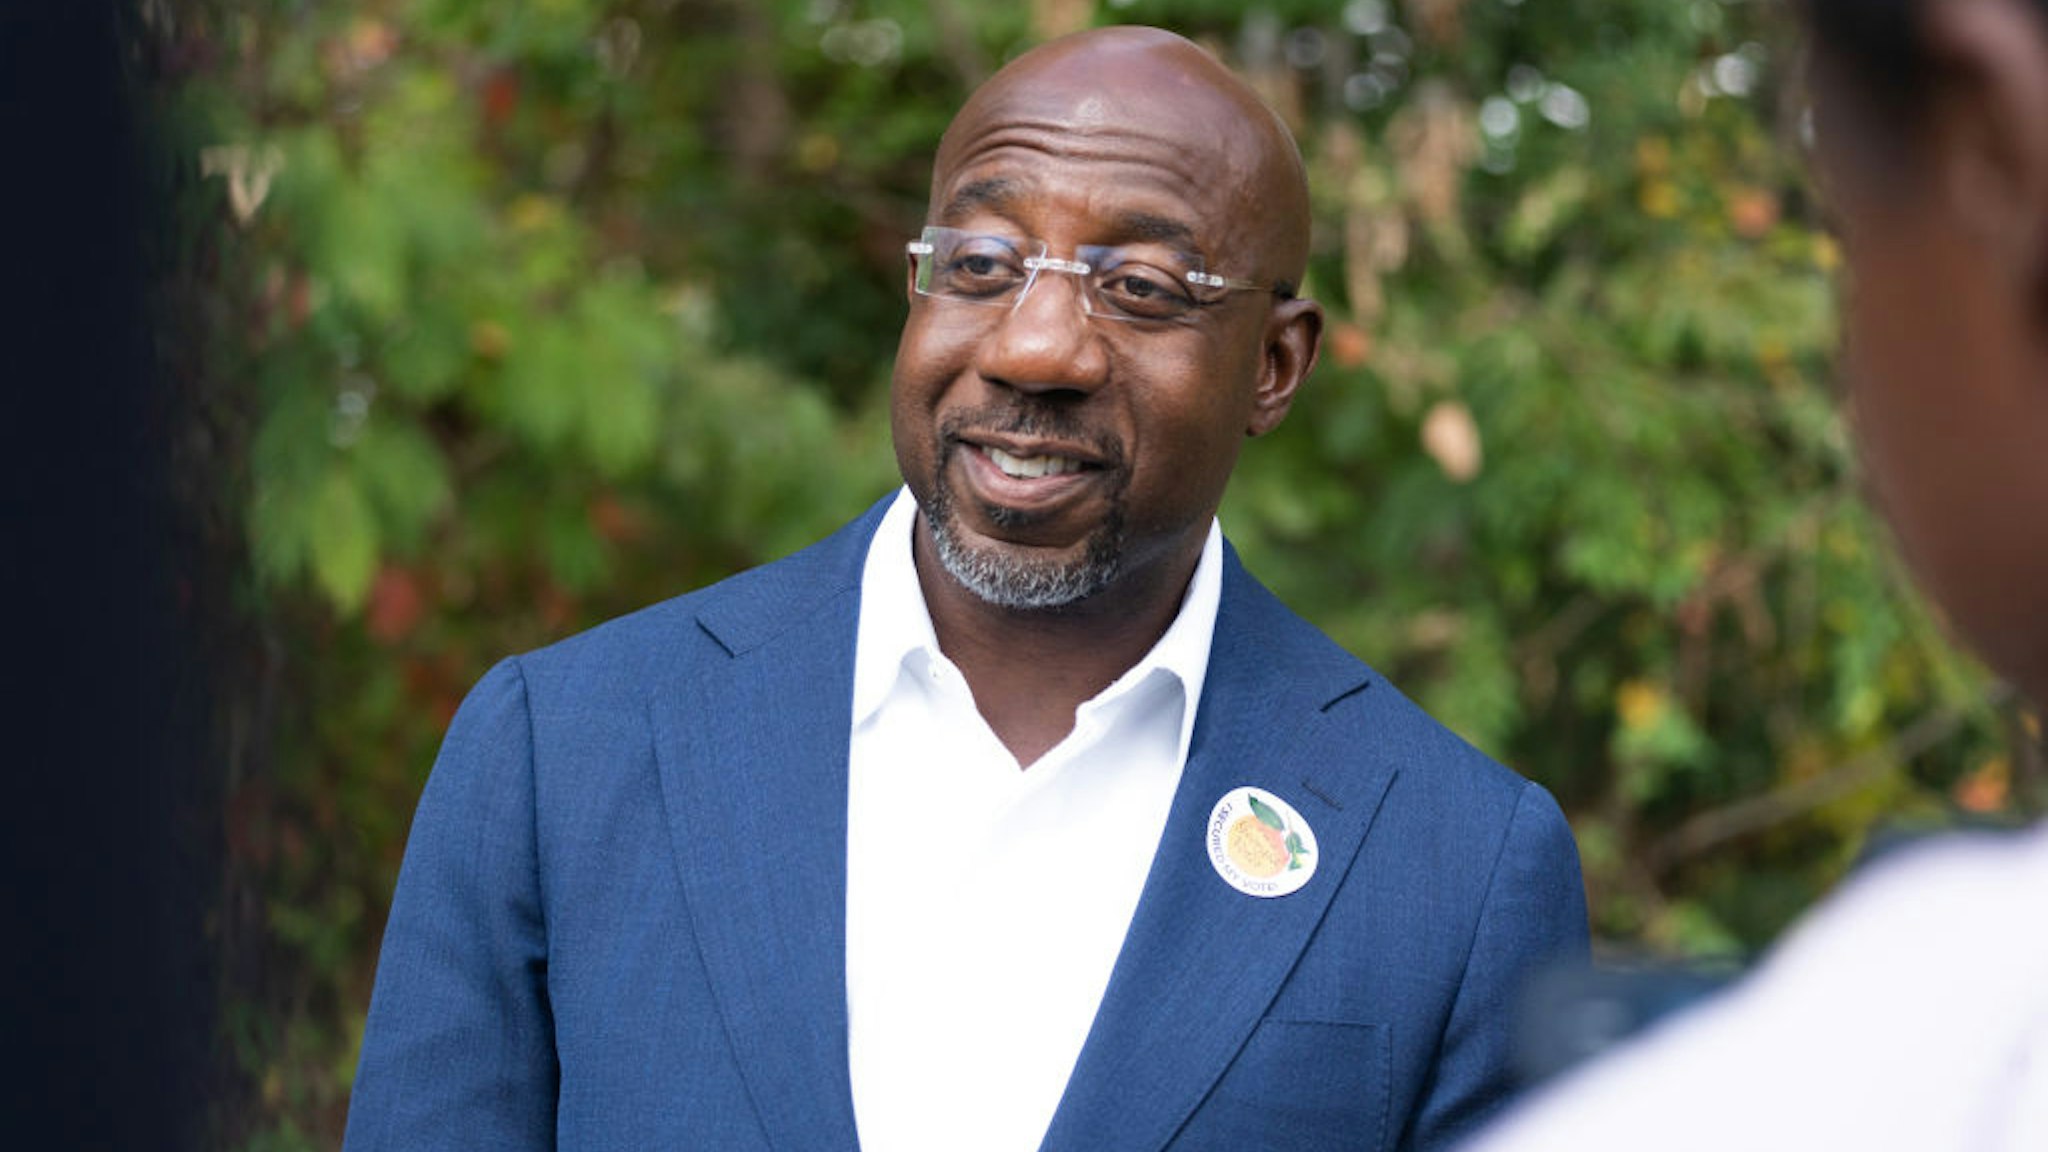 DULUTH, GA - OCTOBER 17: Senator Raphael Warnock (D-GA) meets with community members to encourage them to come out and vote on the first day of early voting on October 17, 2022 in Duluth, Georgia. The Democratic incumbent, Warnock is running against Republican candidate Herschel Walker for the Senate seat in Georgia. (Photo by Megan Varner/Getty Images)